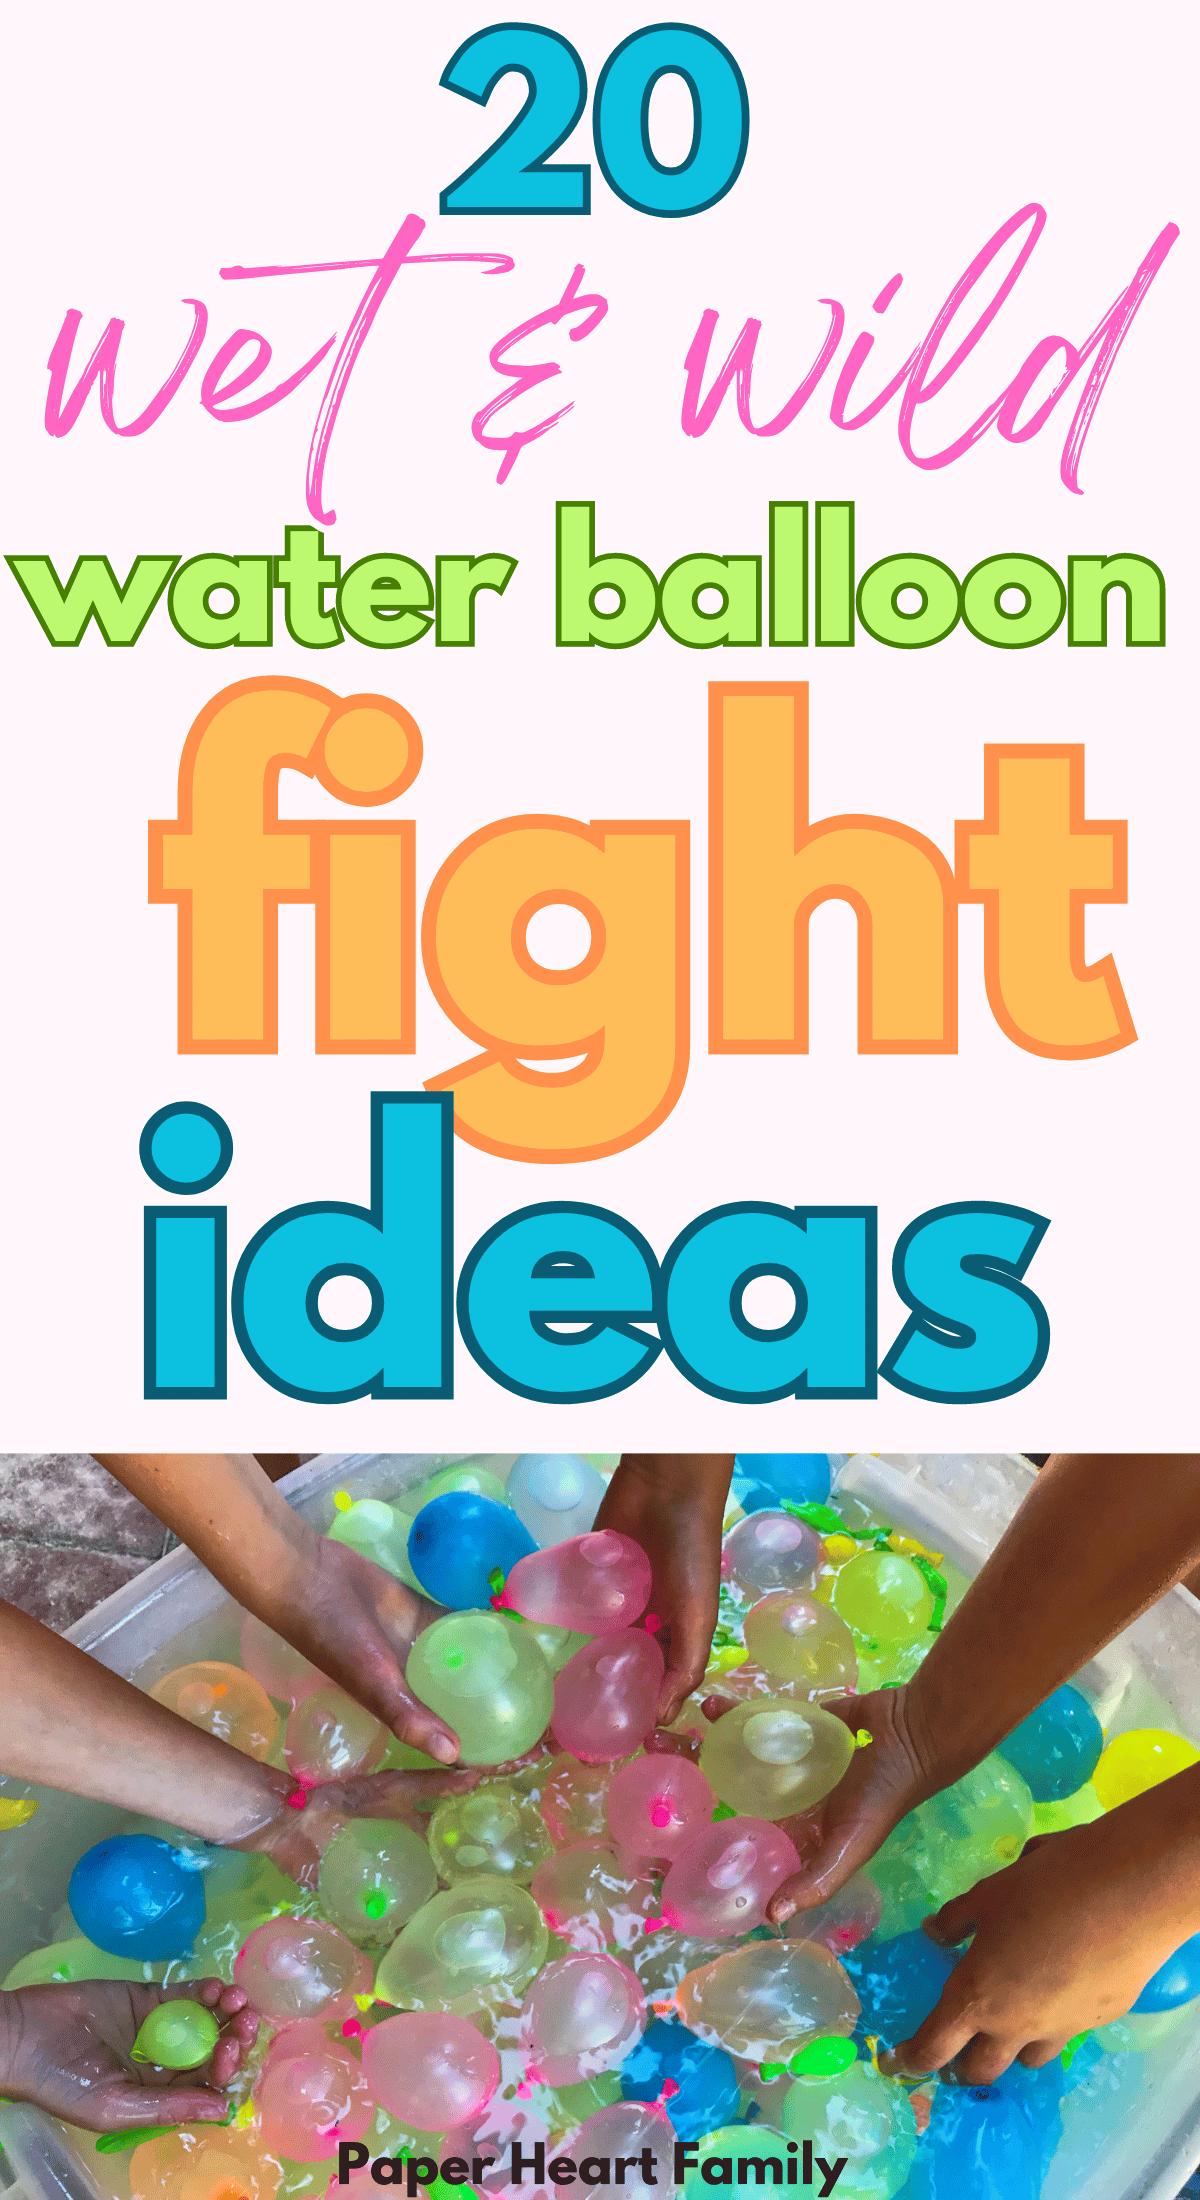 kids grabbing water balloons to prepare for a water balloon fight